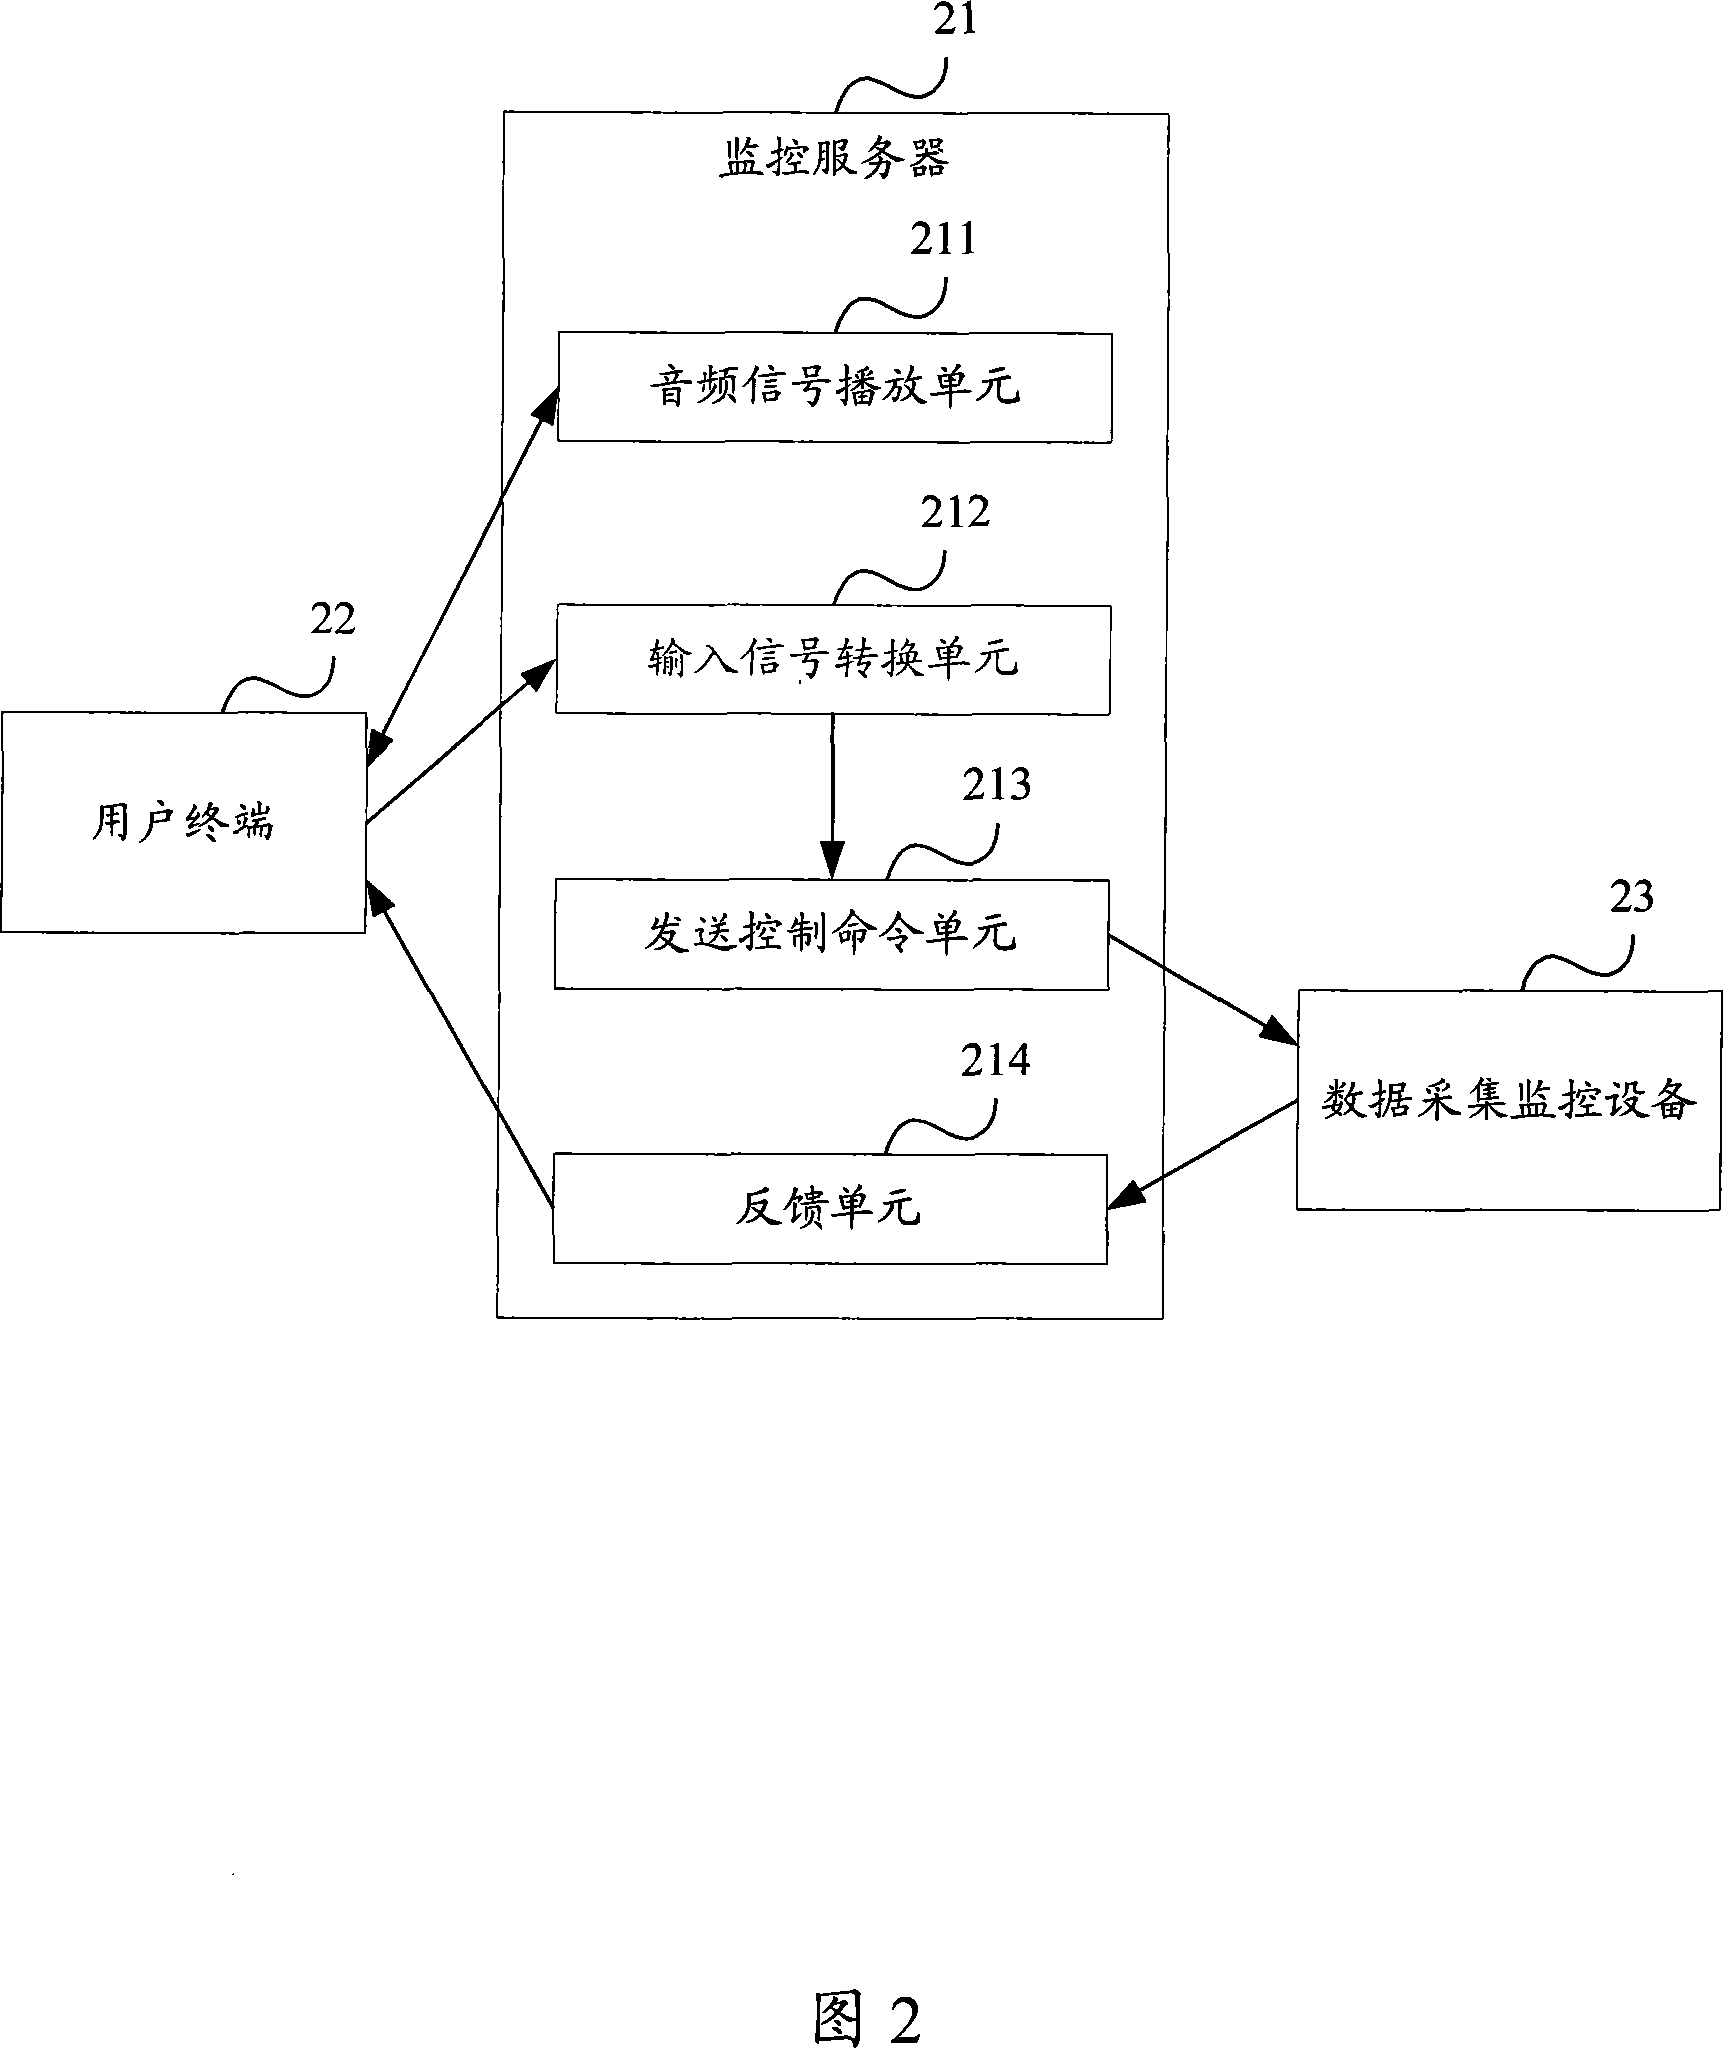 Remote control method, system and apparatus